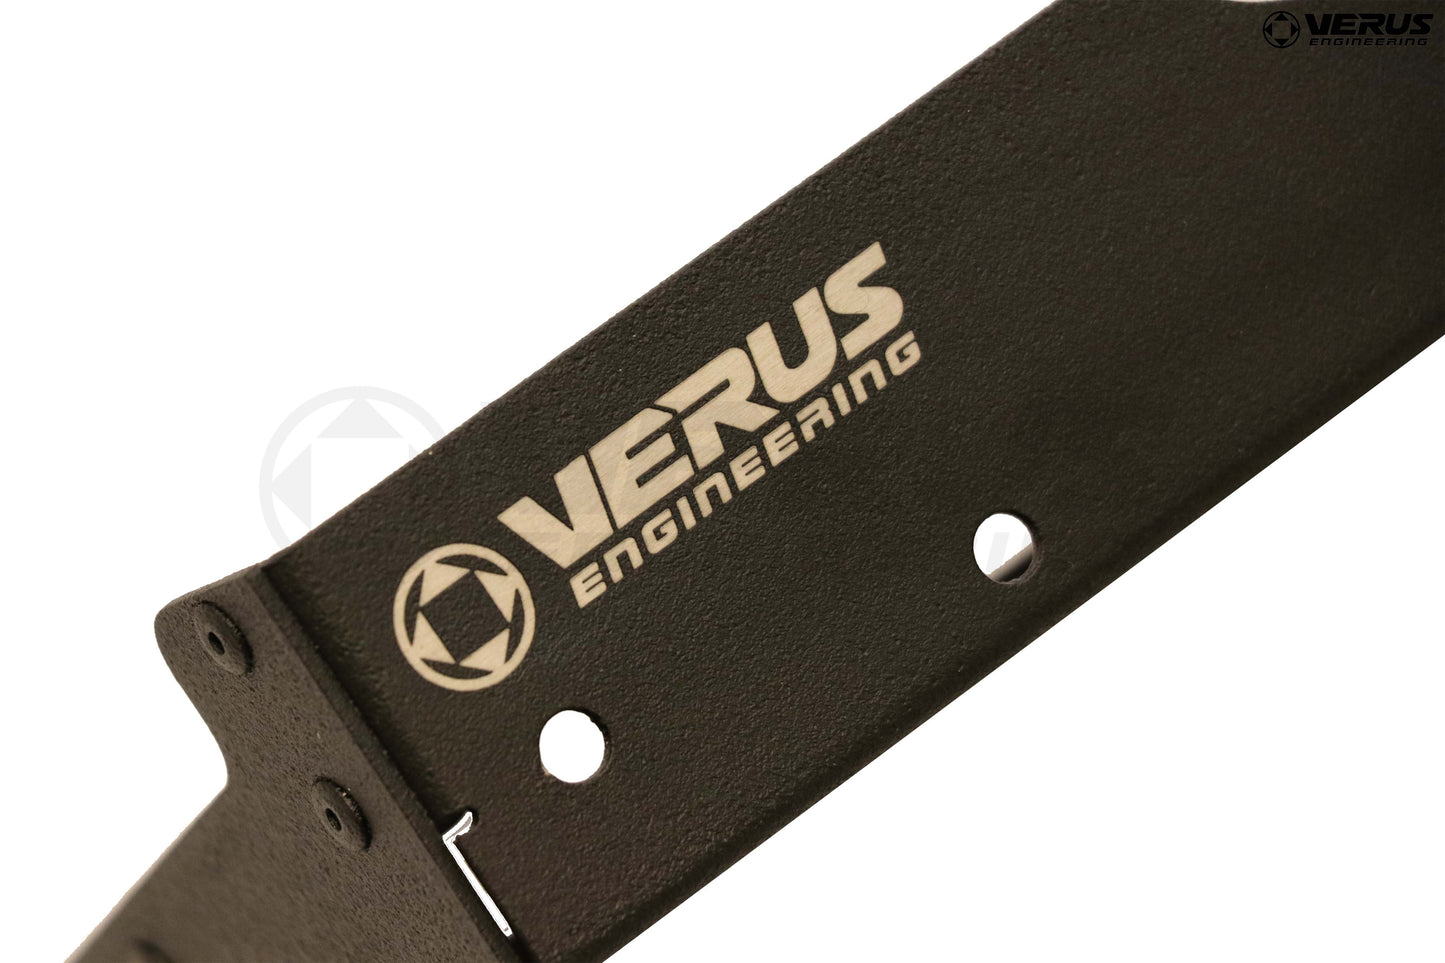 Verus - Rear Differential Cooling Plate || A9x